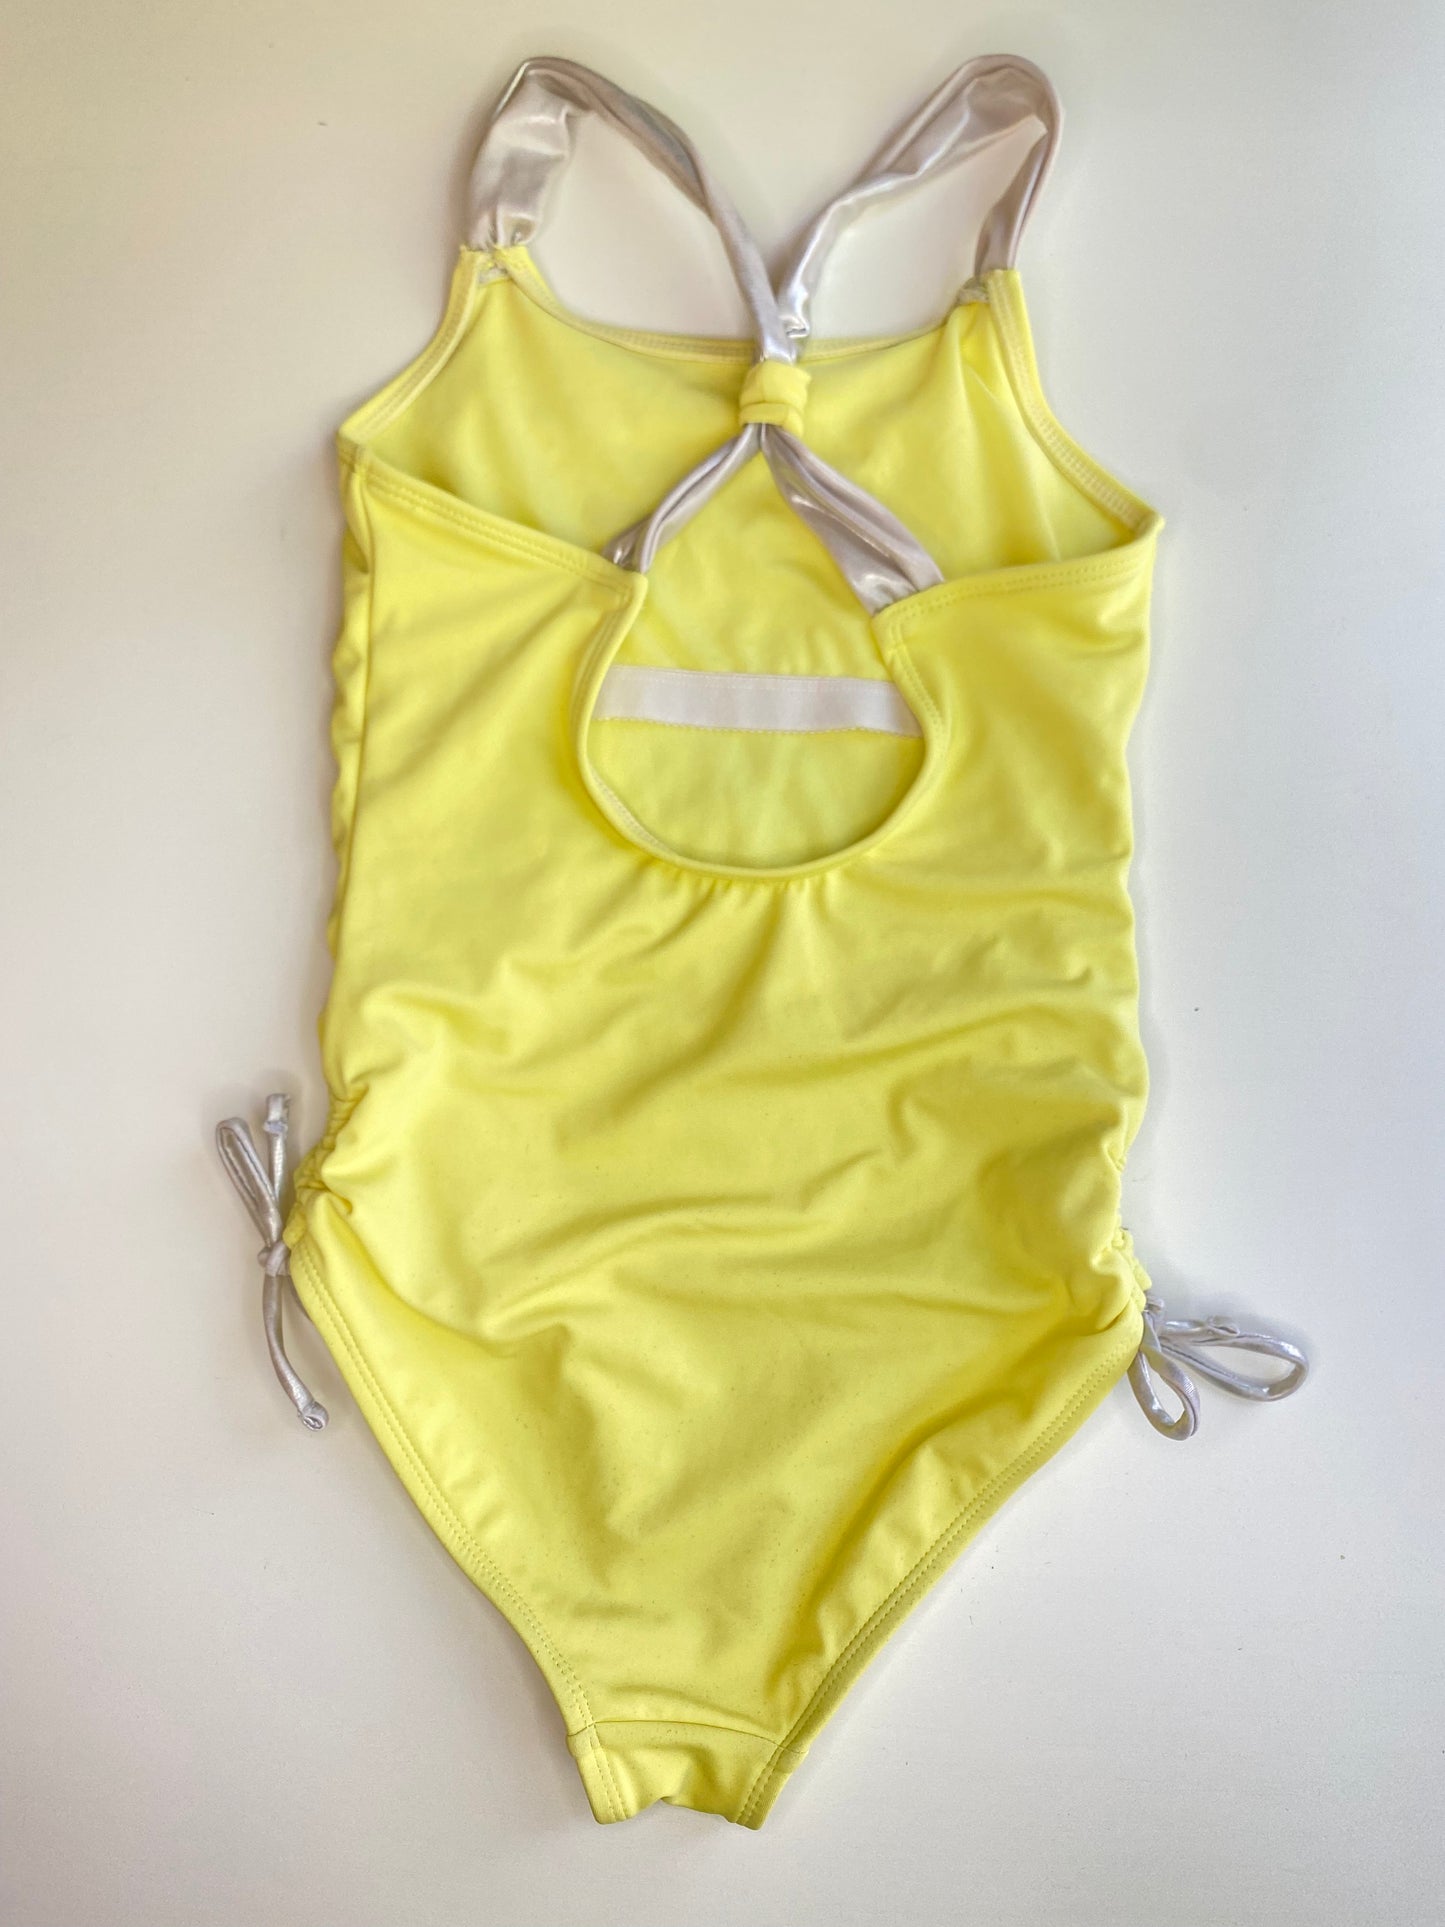 JUSTICE One Piece Swimsuit / 8Y